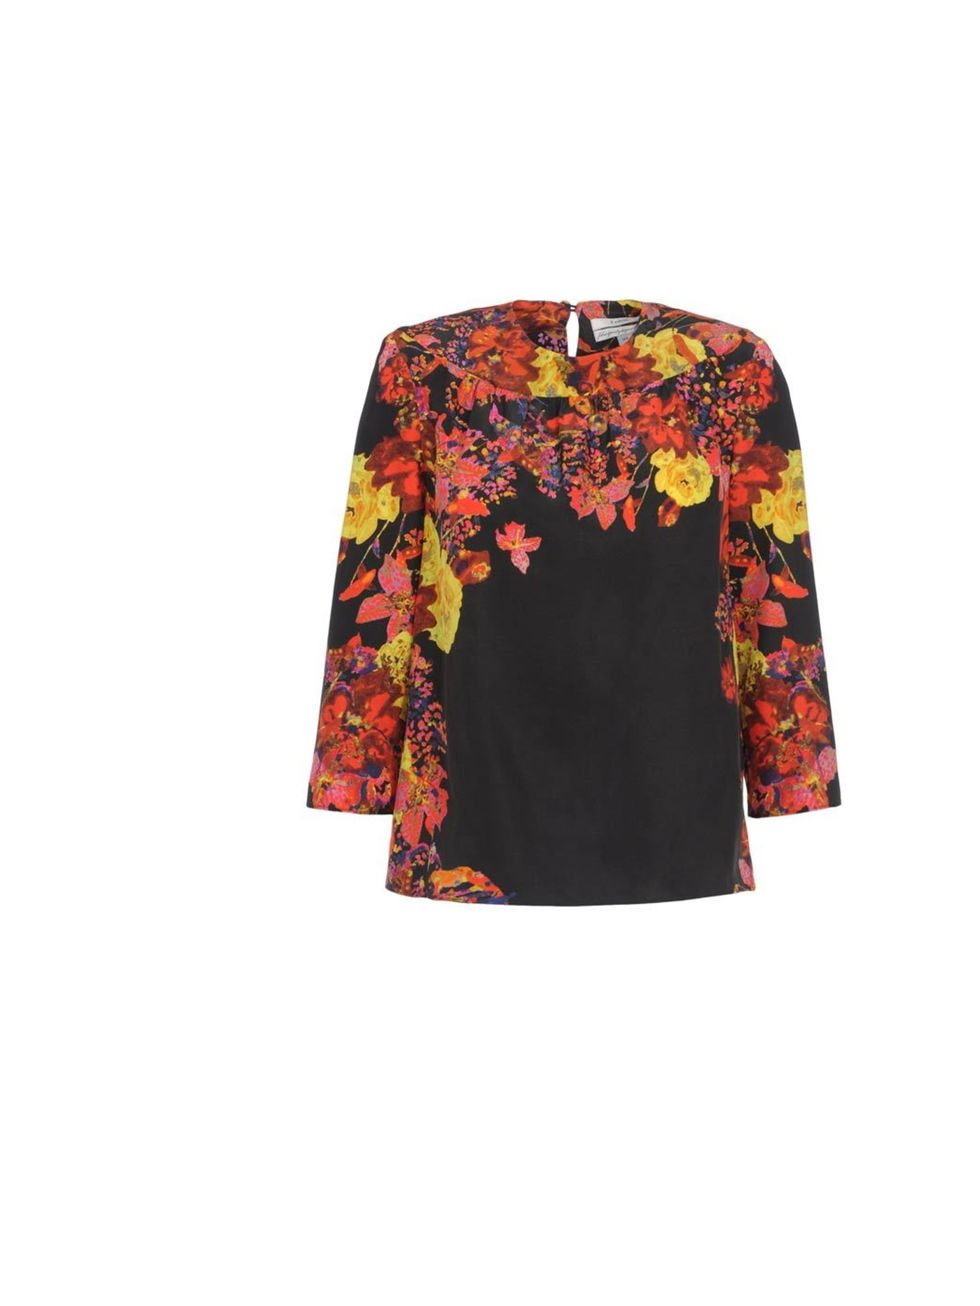 <p>Erdem floral blouse, £492, at <a href="http://www.thecorner.com/gb/women/blouse_cod38272493no.html">thecorner.com</a></p>